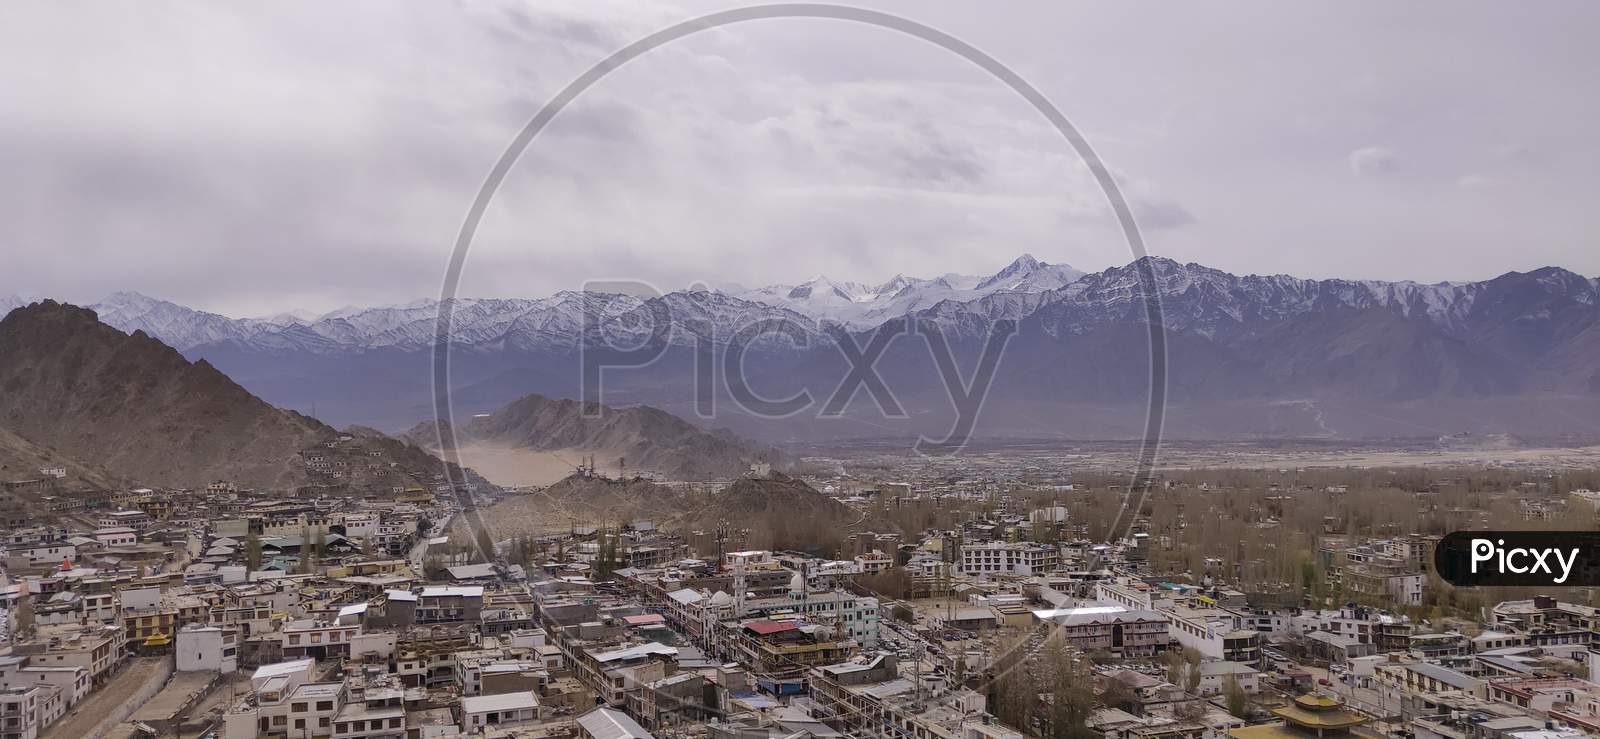 Leh city is a town in the Leh district of the Indian state of Jammu and Kashmir. It was the capital of the Himalayan kingdom of Ladakh.